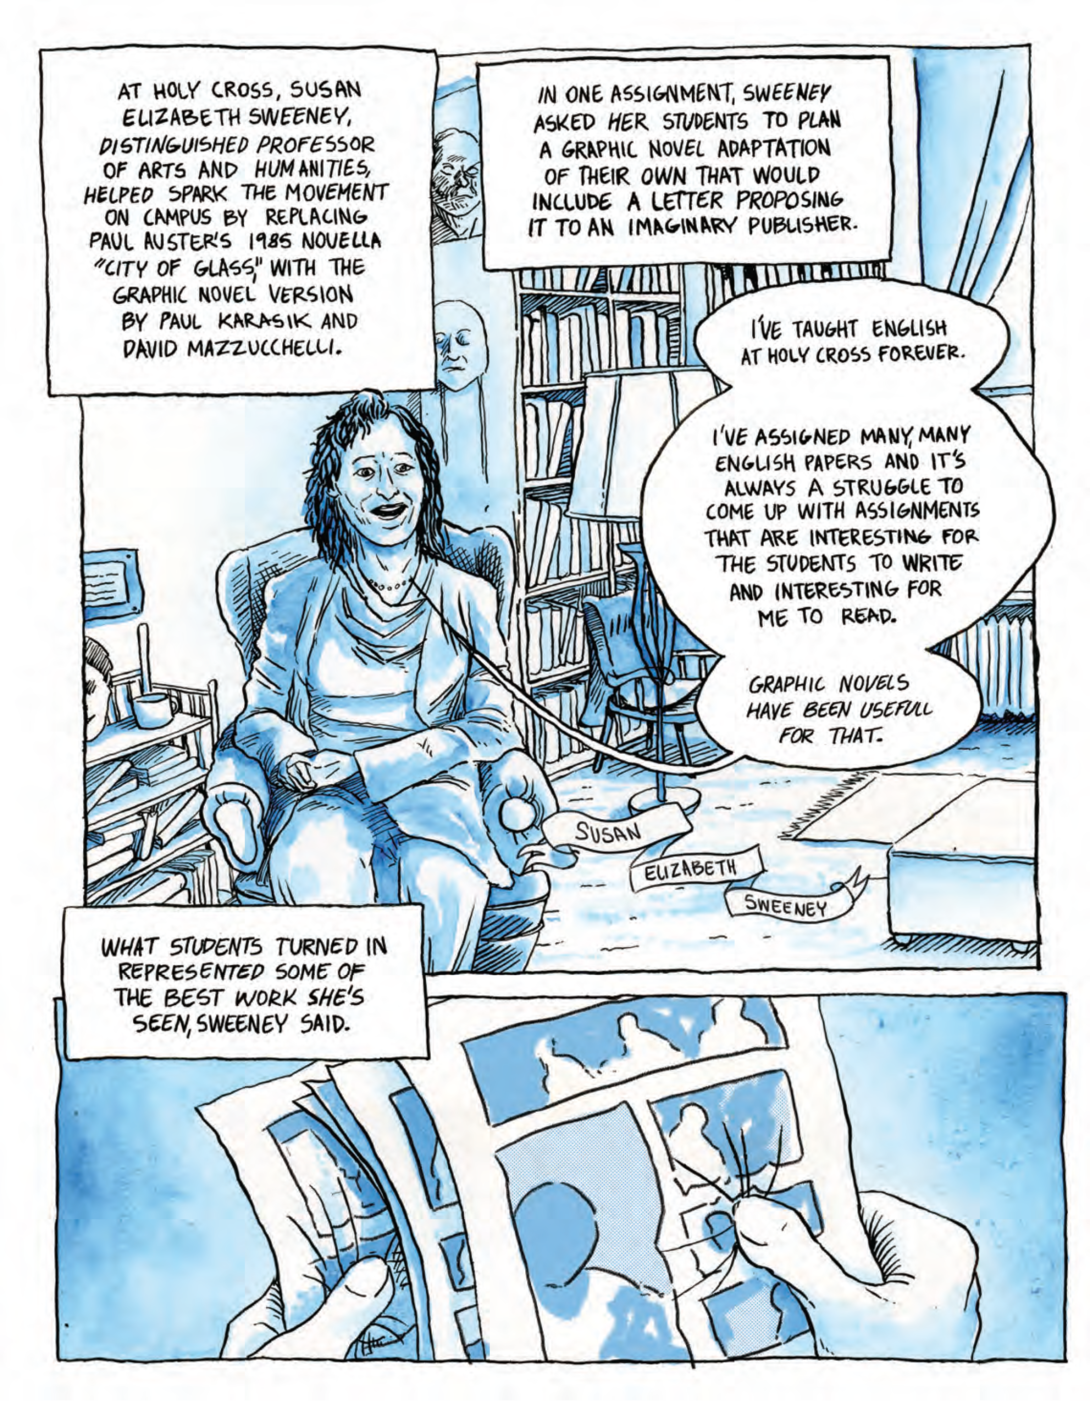 Professor Beth Sweeney illustrated in her office reading student comics